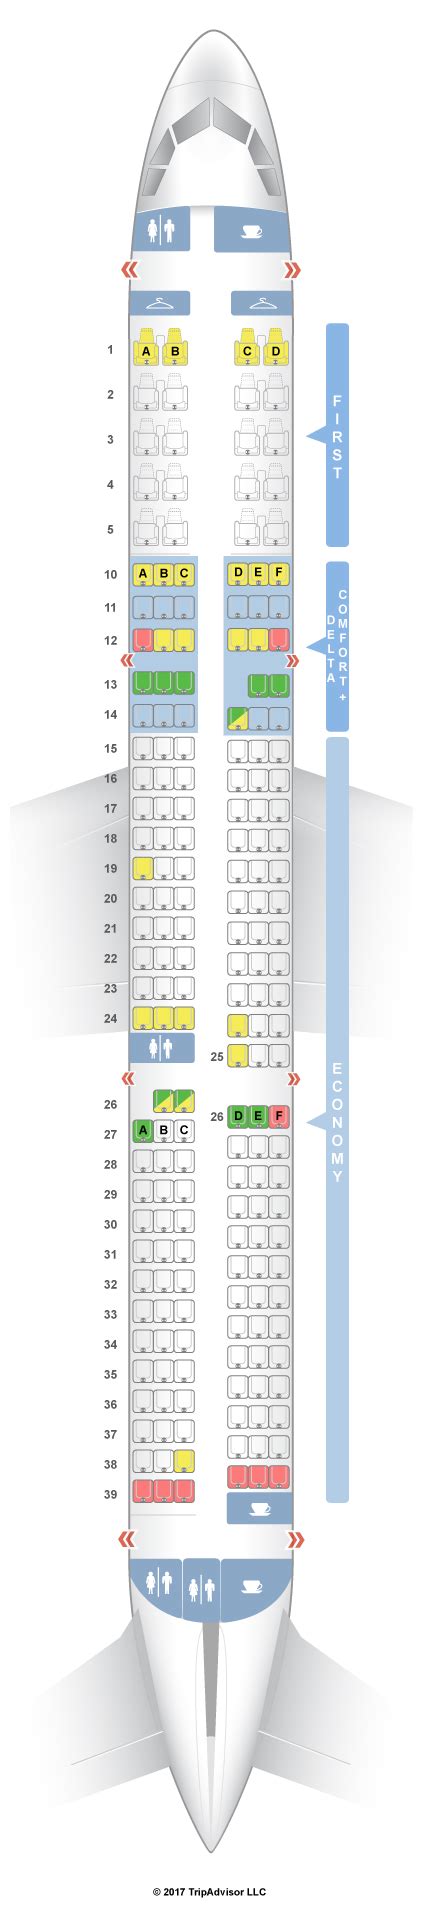 Delta Airlines Aircraft Seating Charts My XXX Hot Girl